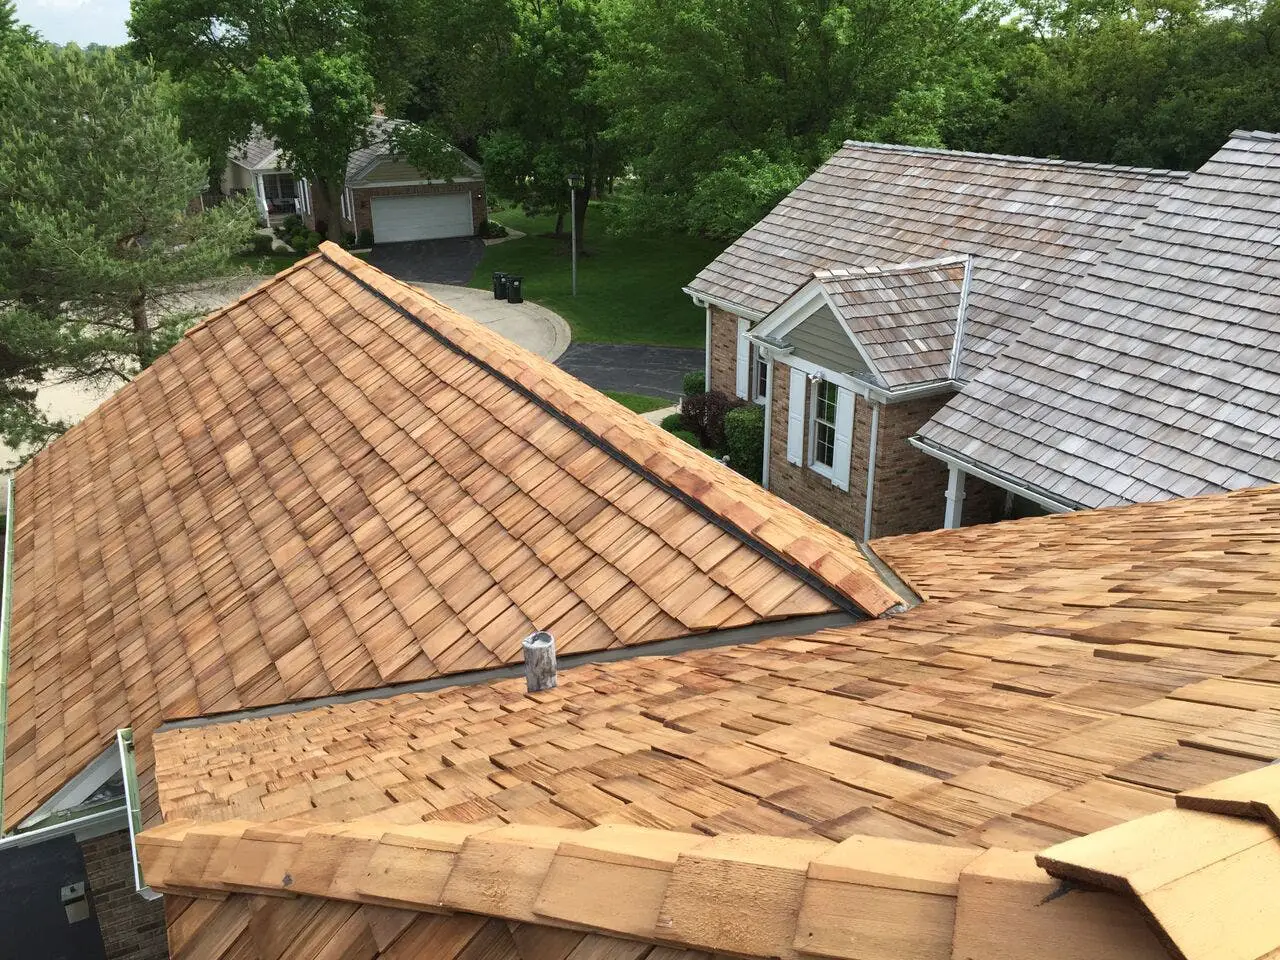 The Facts About Cedar Roofing and What You Should Know